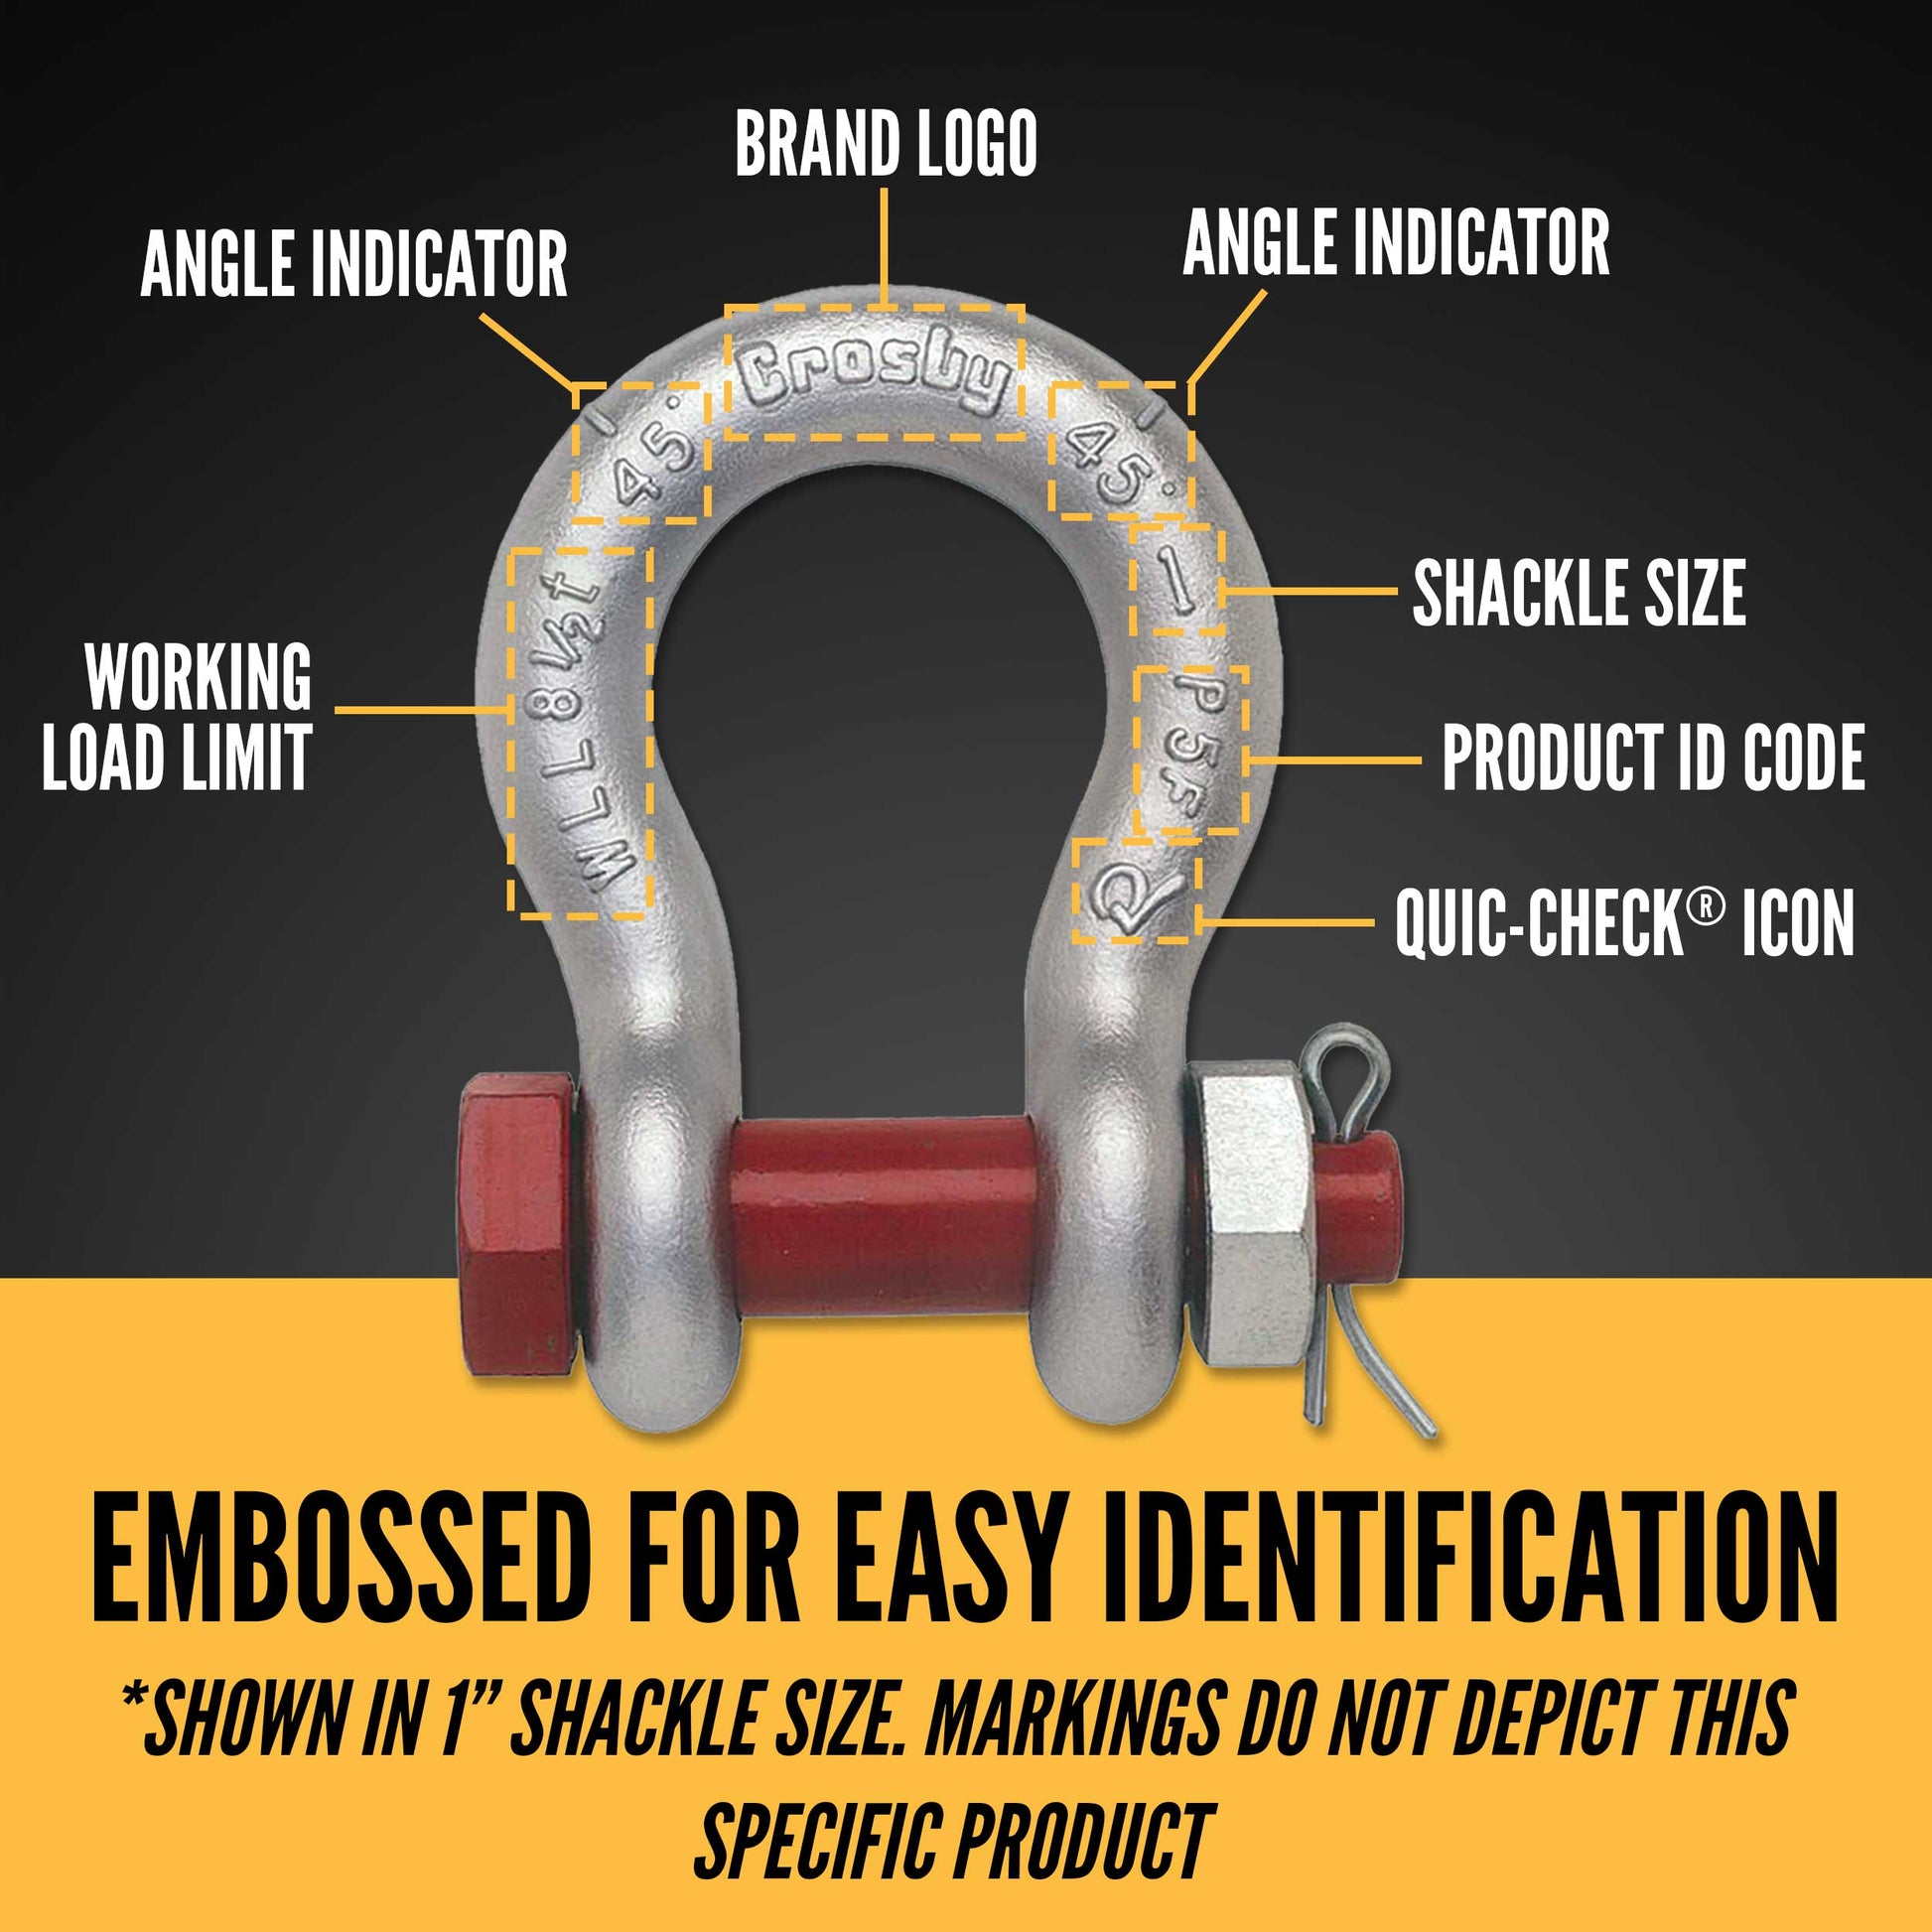 5/16" Crosby® Bolt Type Anchor Shackle | G-2130 - 0.75 Ton embossed for easy identification